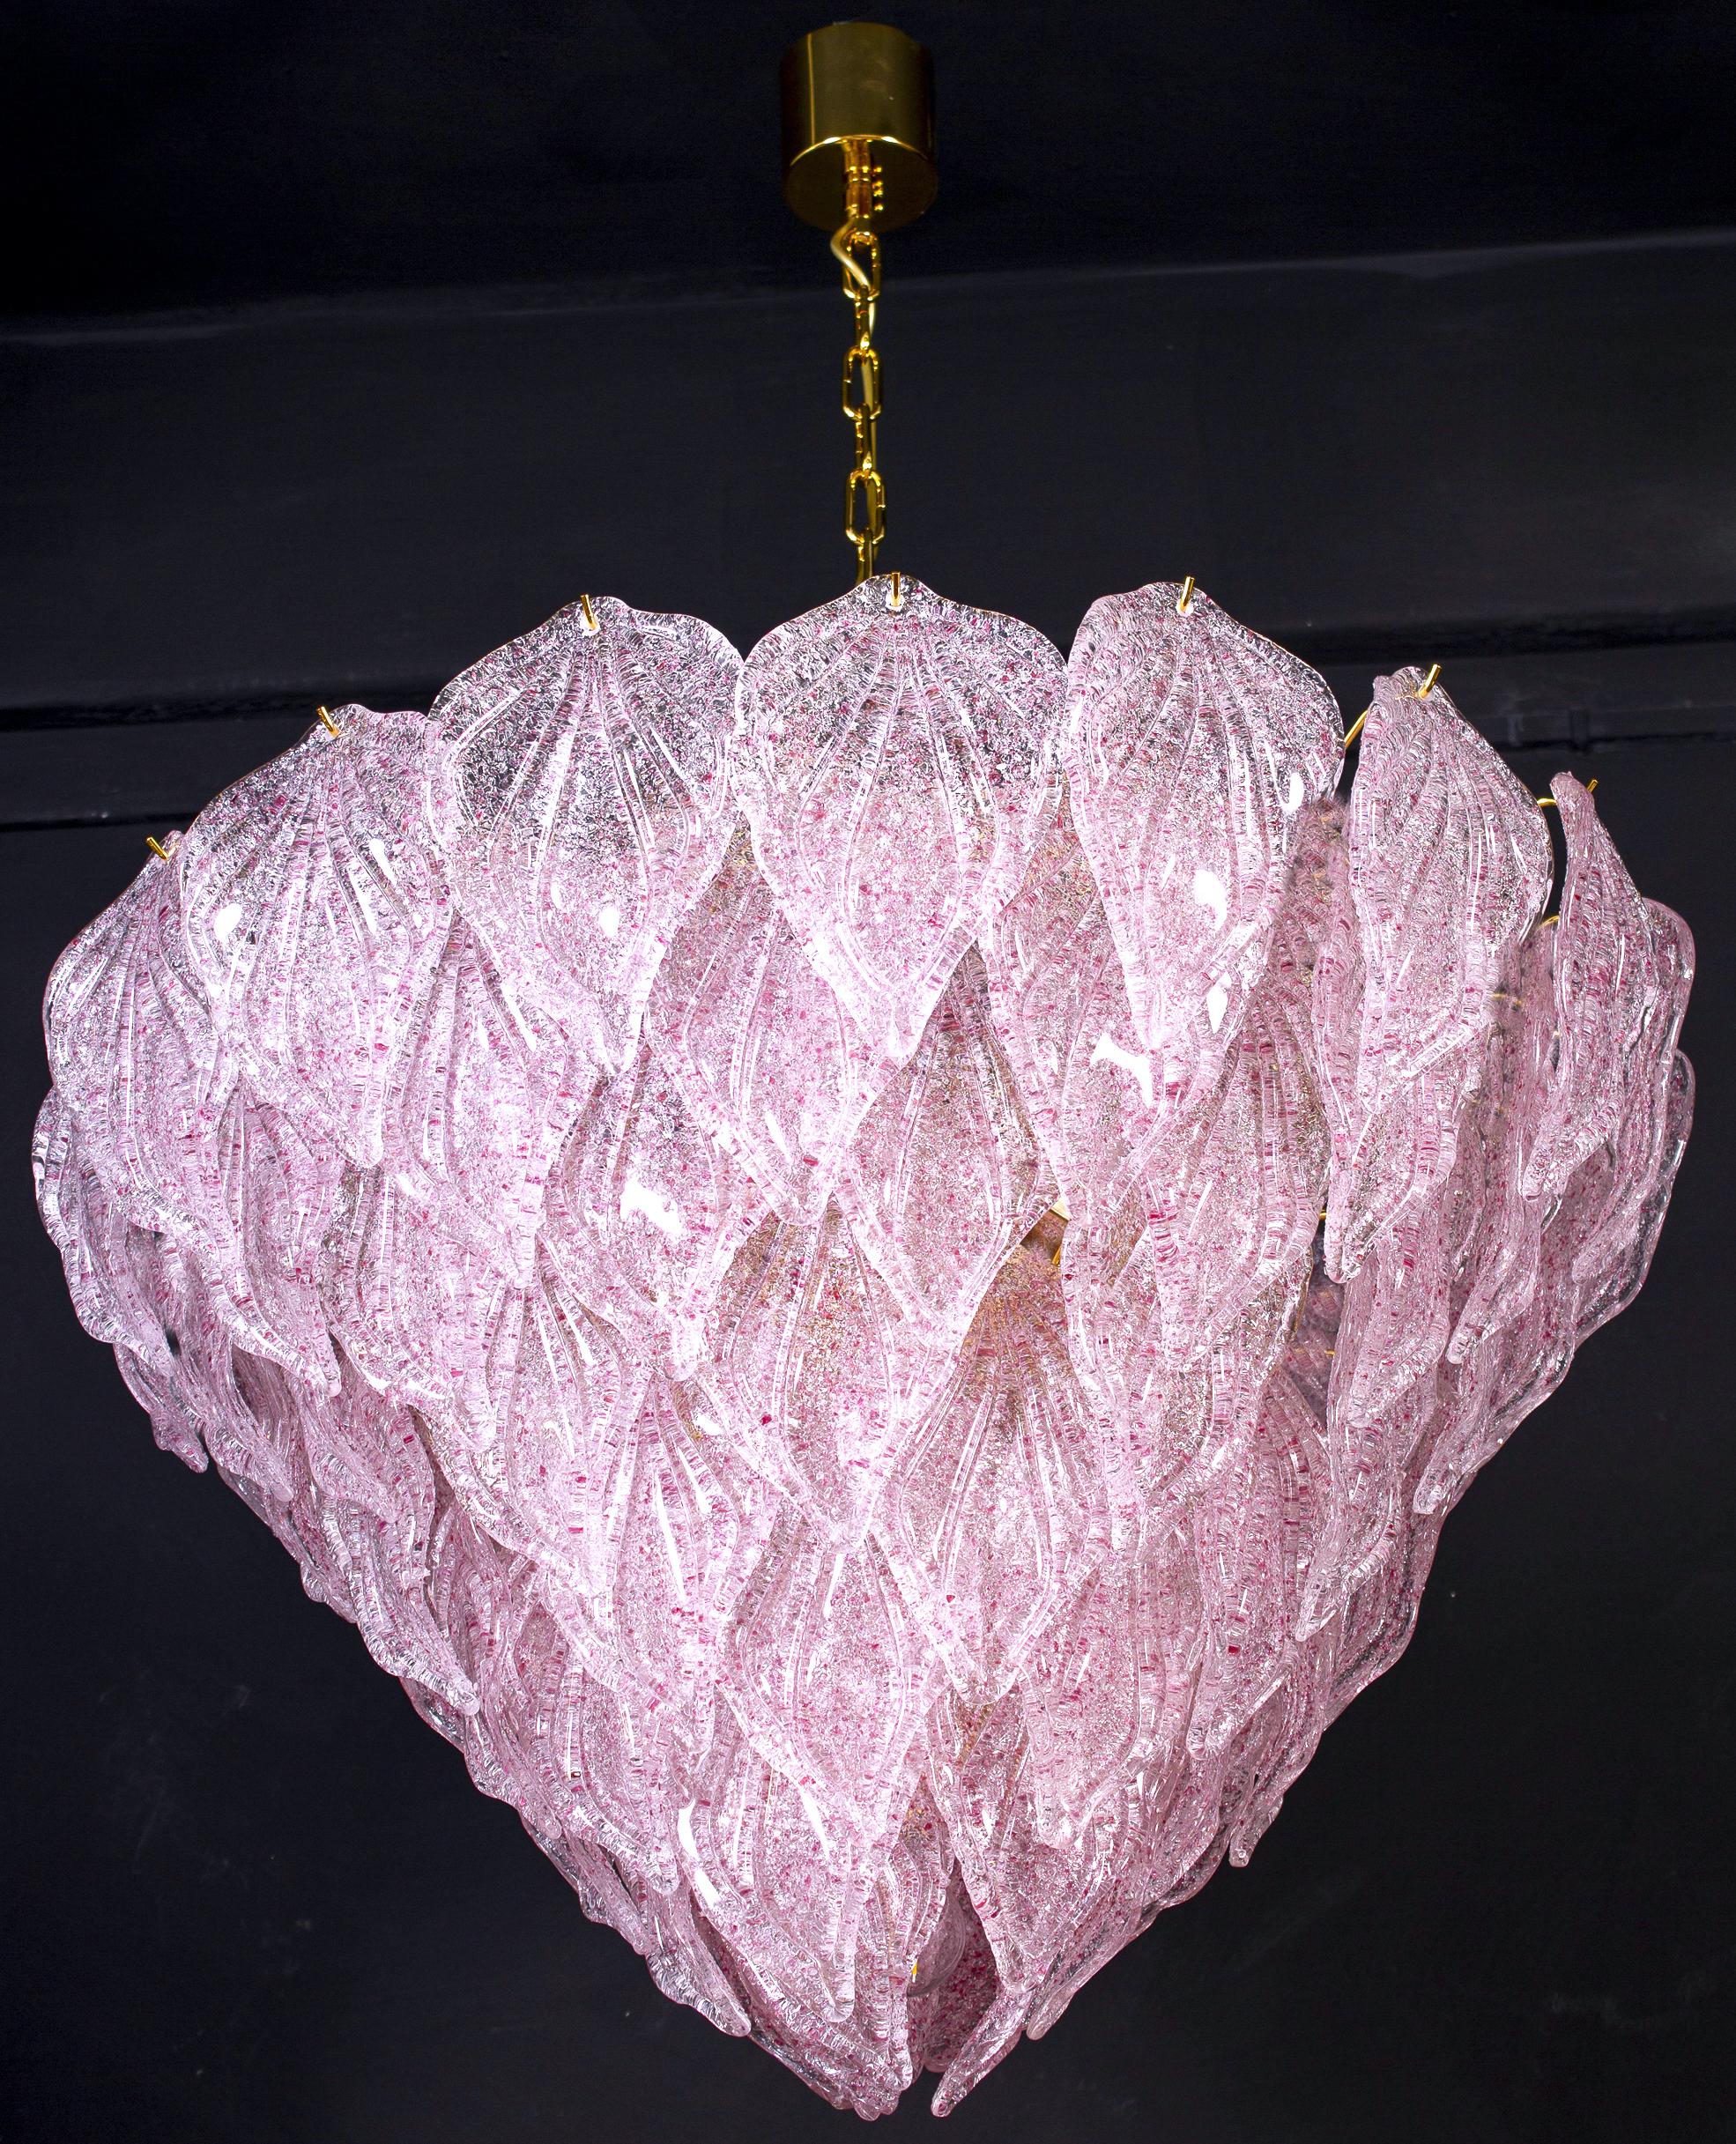 Murano polar pink chandelier, each with 88 precious hand blown glass leaves hanging on the brass frame. Spectacular light effect.
Available also a pair and four pair of sconces.

Measures: Height 75 cm, with chain 130 cm
Ten E 27 lights bulbs.
This